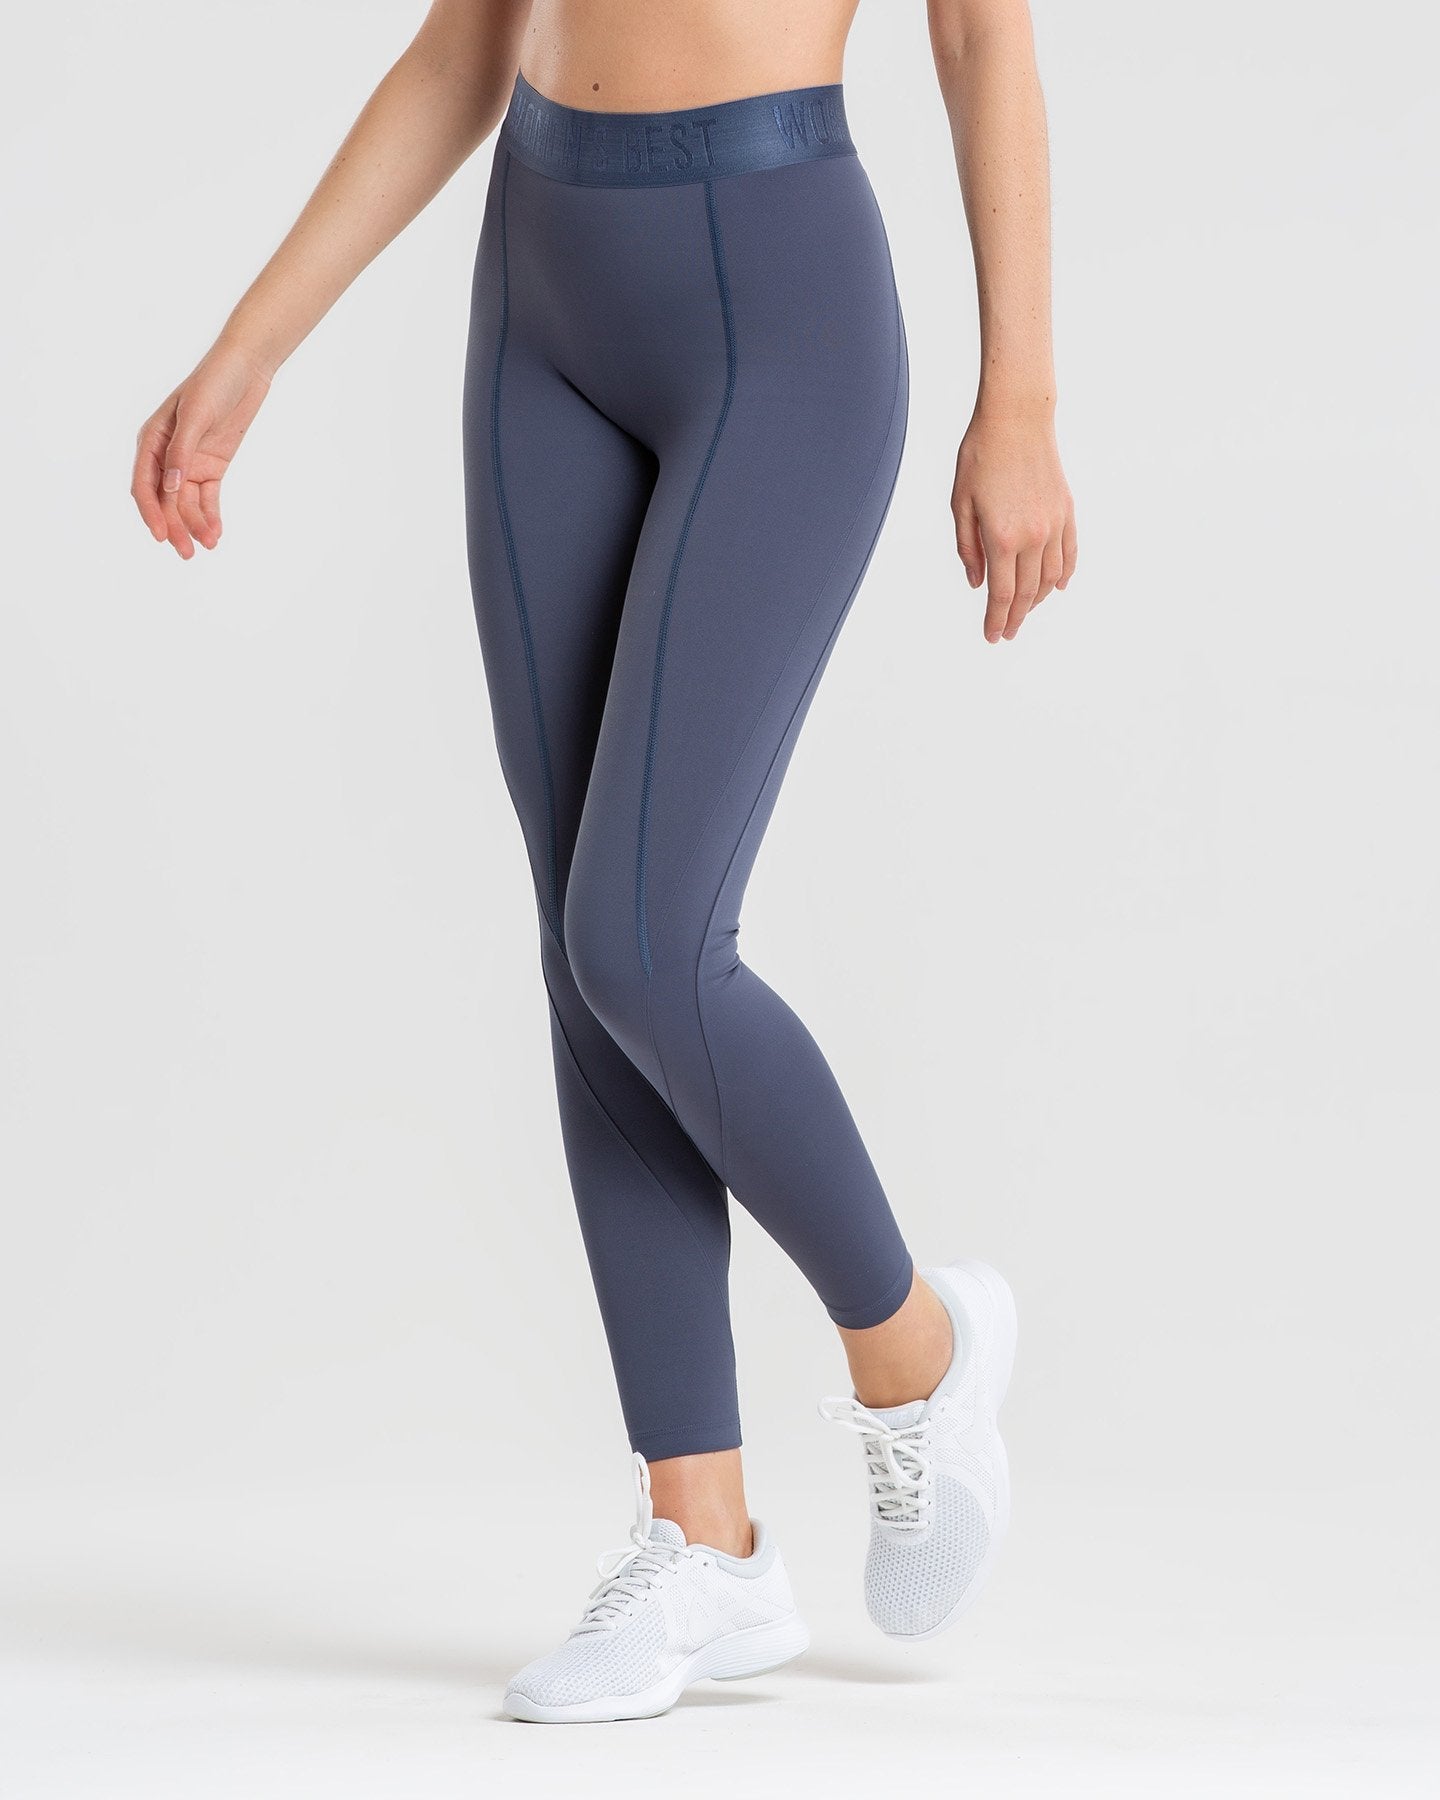 Hold High Waisted Leggings - Space Grey | Women's Best